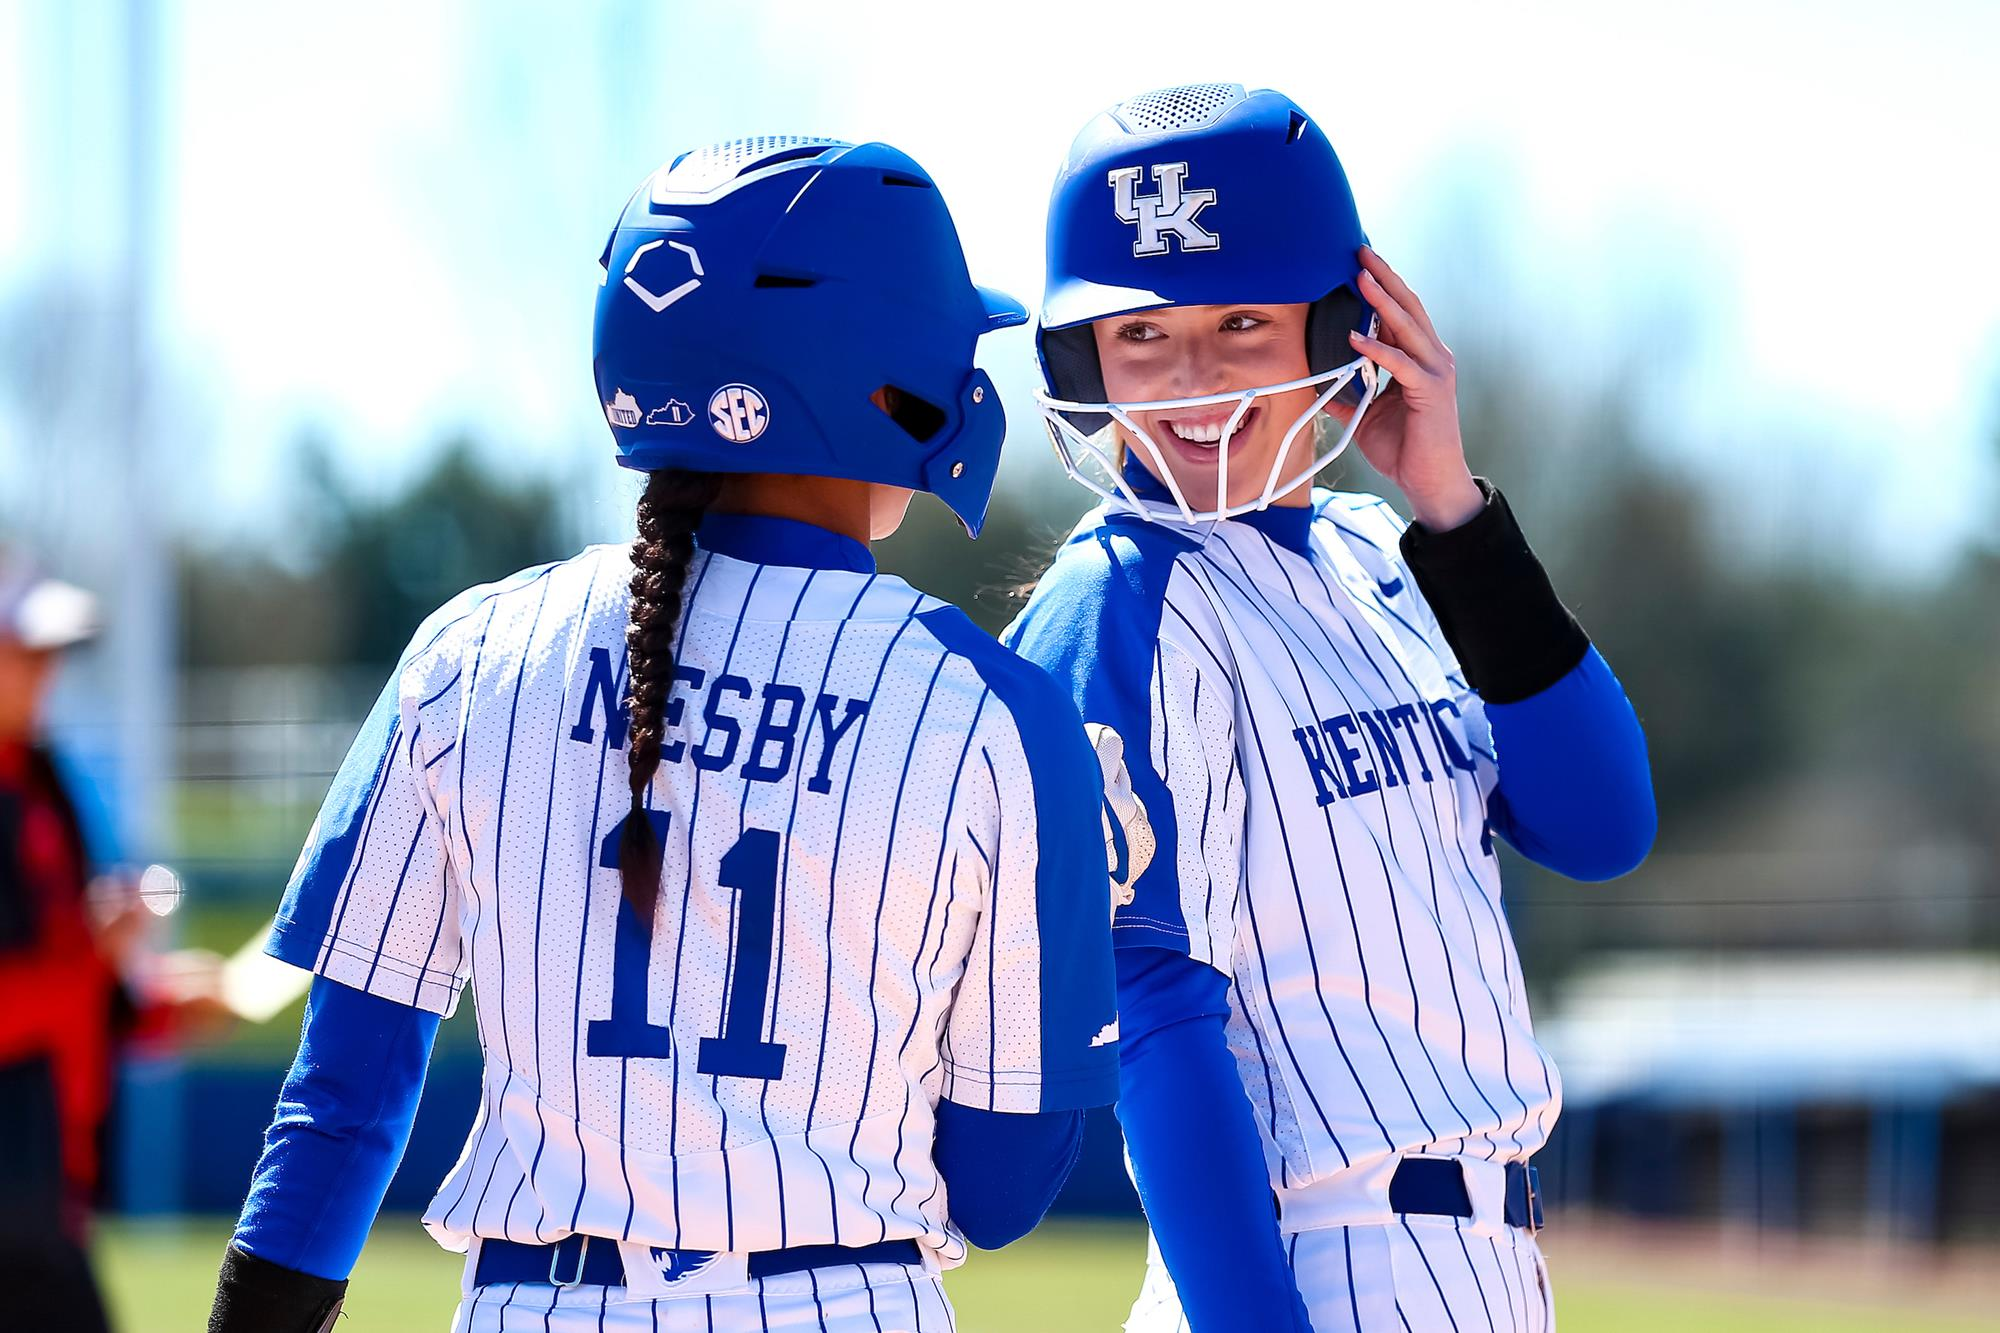 Kentucky Softball Featured 12 Times on National Television